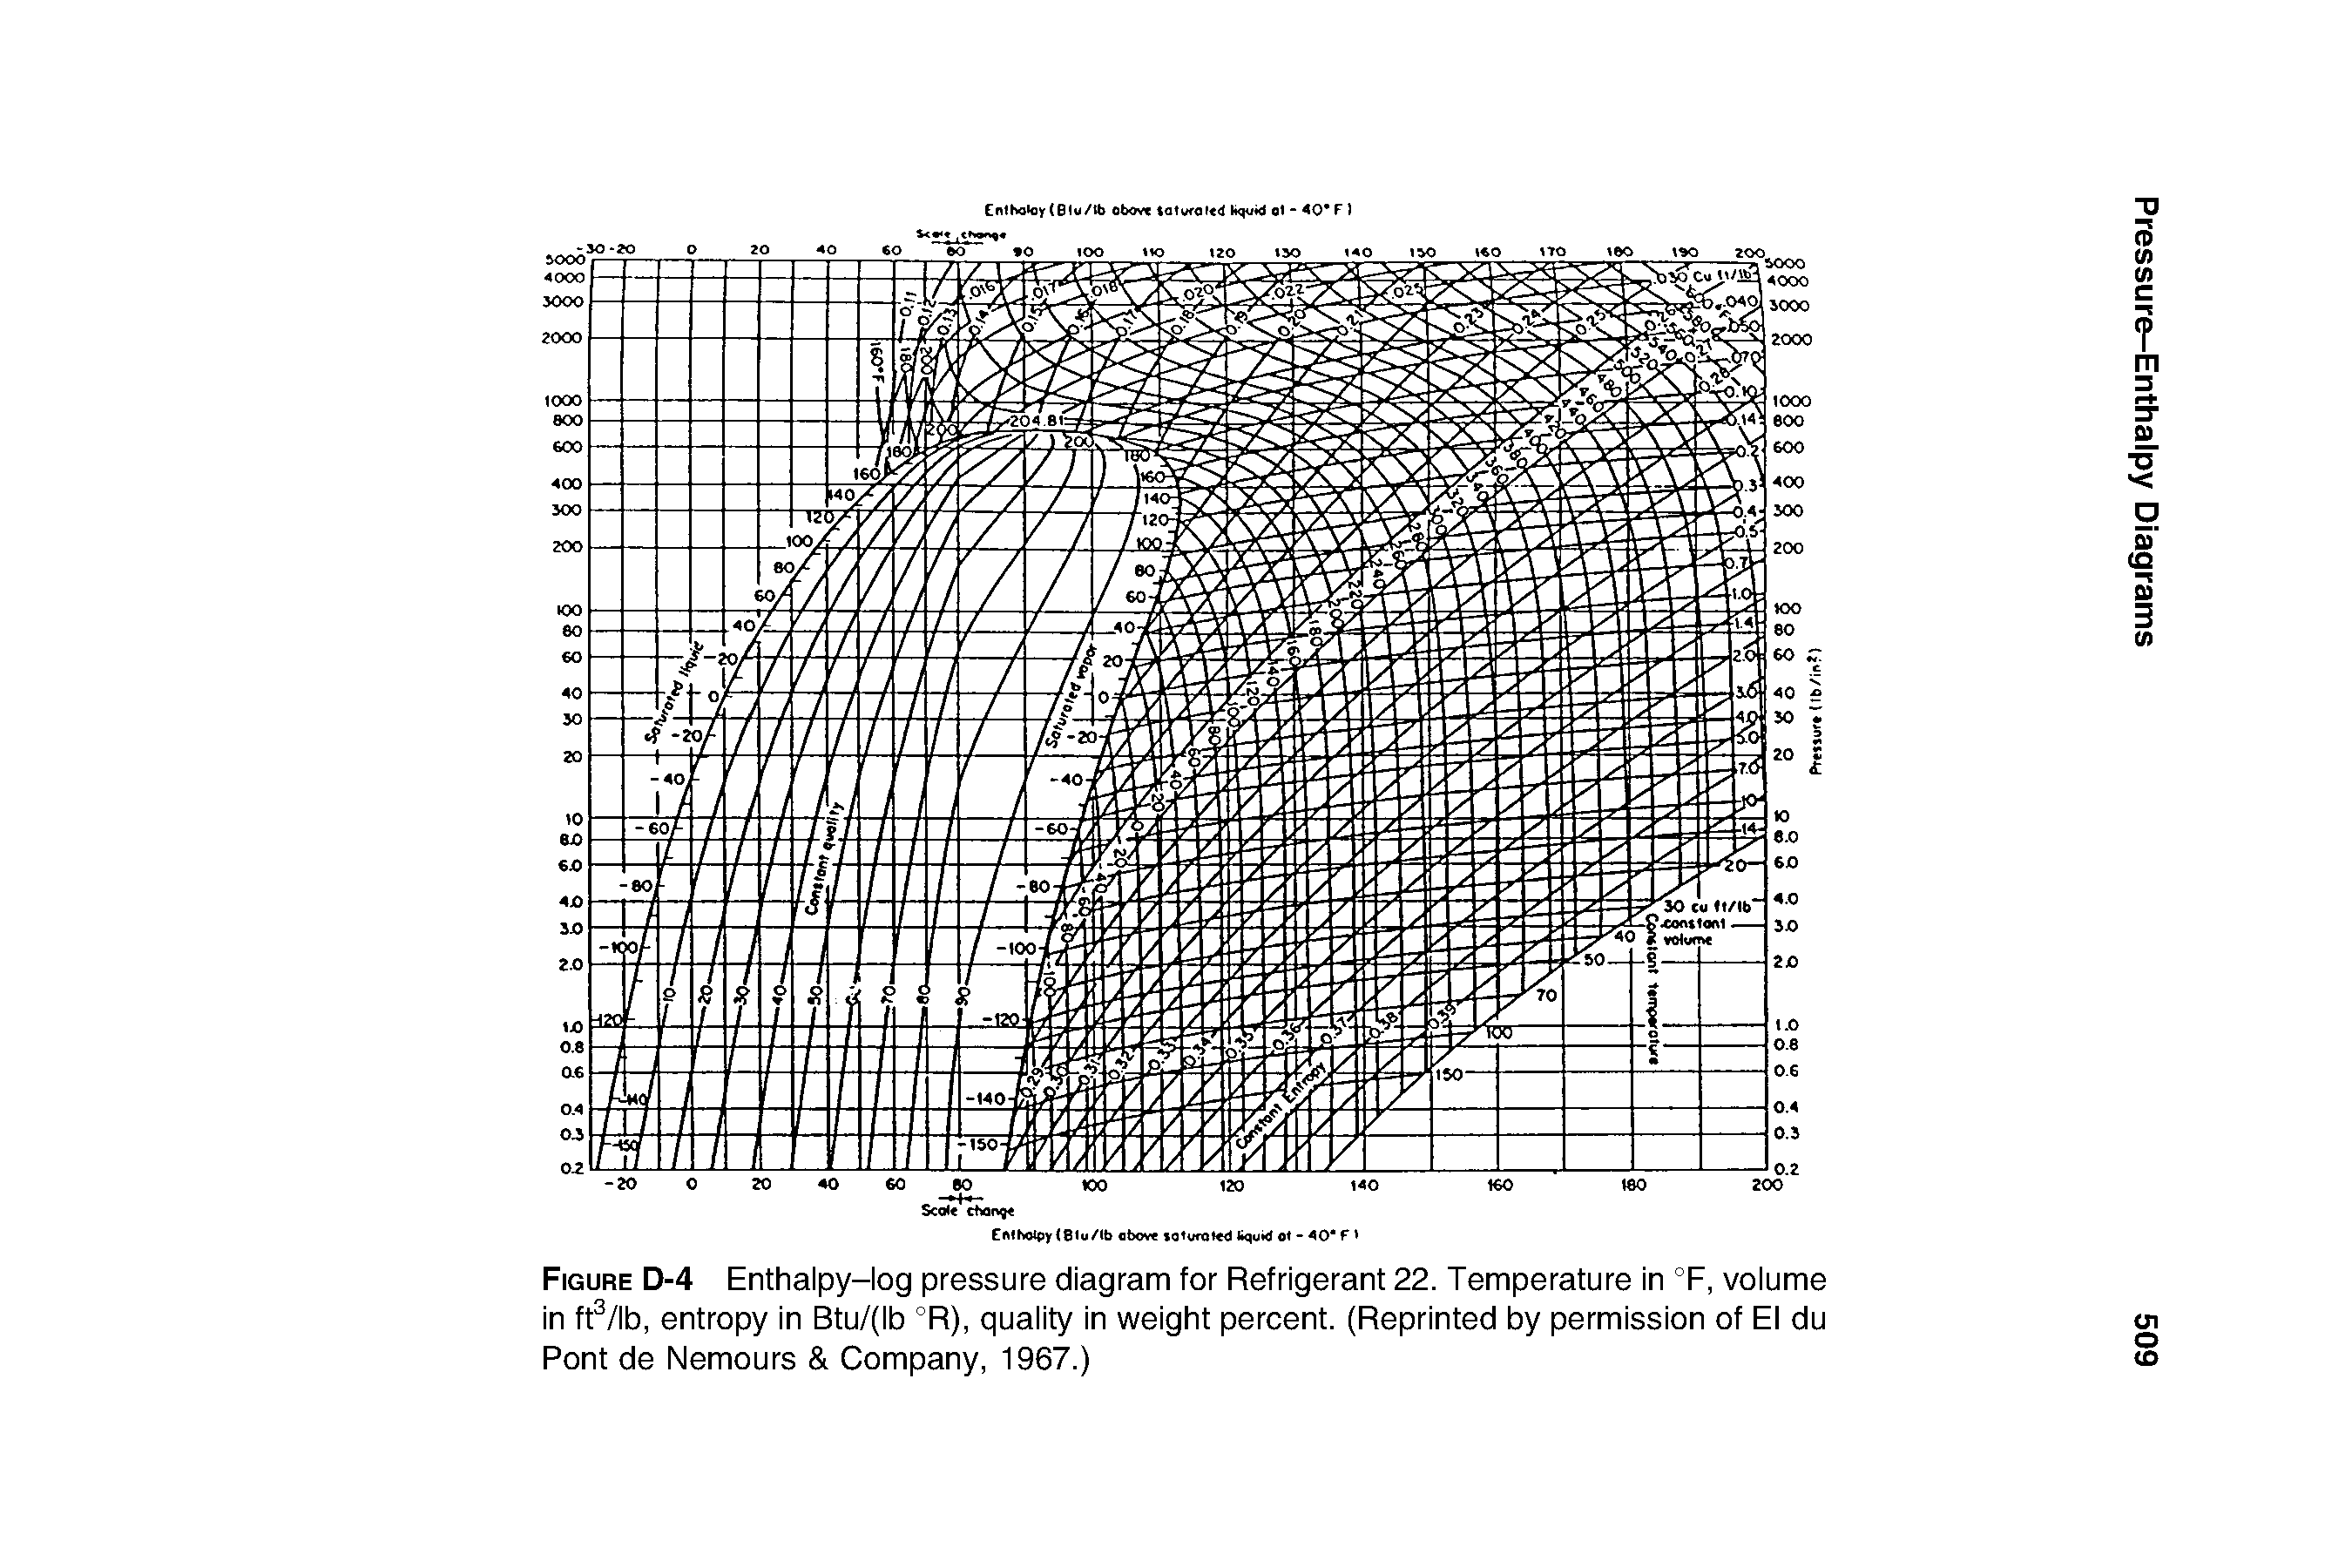 Figure D-4 Enthalpy-log pressure diagram for Refrigerant 22. Temperature in °F, volume in ft3/lb, entropy in Btu/(lb °R), quality in weight percent. (Reprinted by permission of El du Pont de Nemours Company, 1967.)...